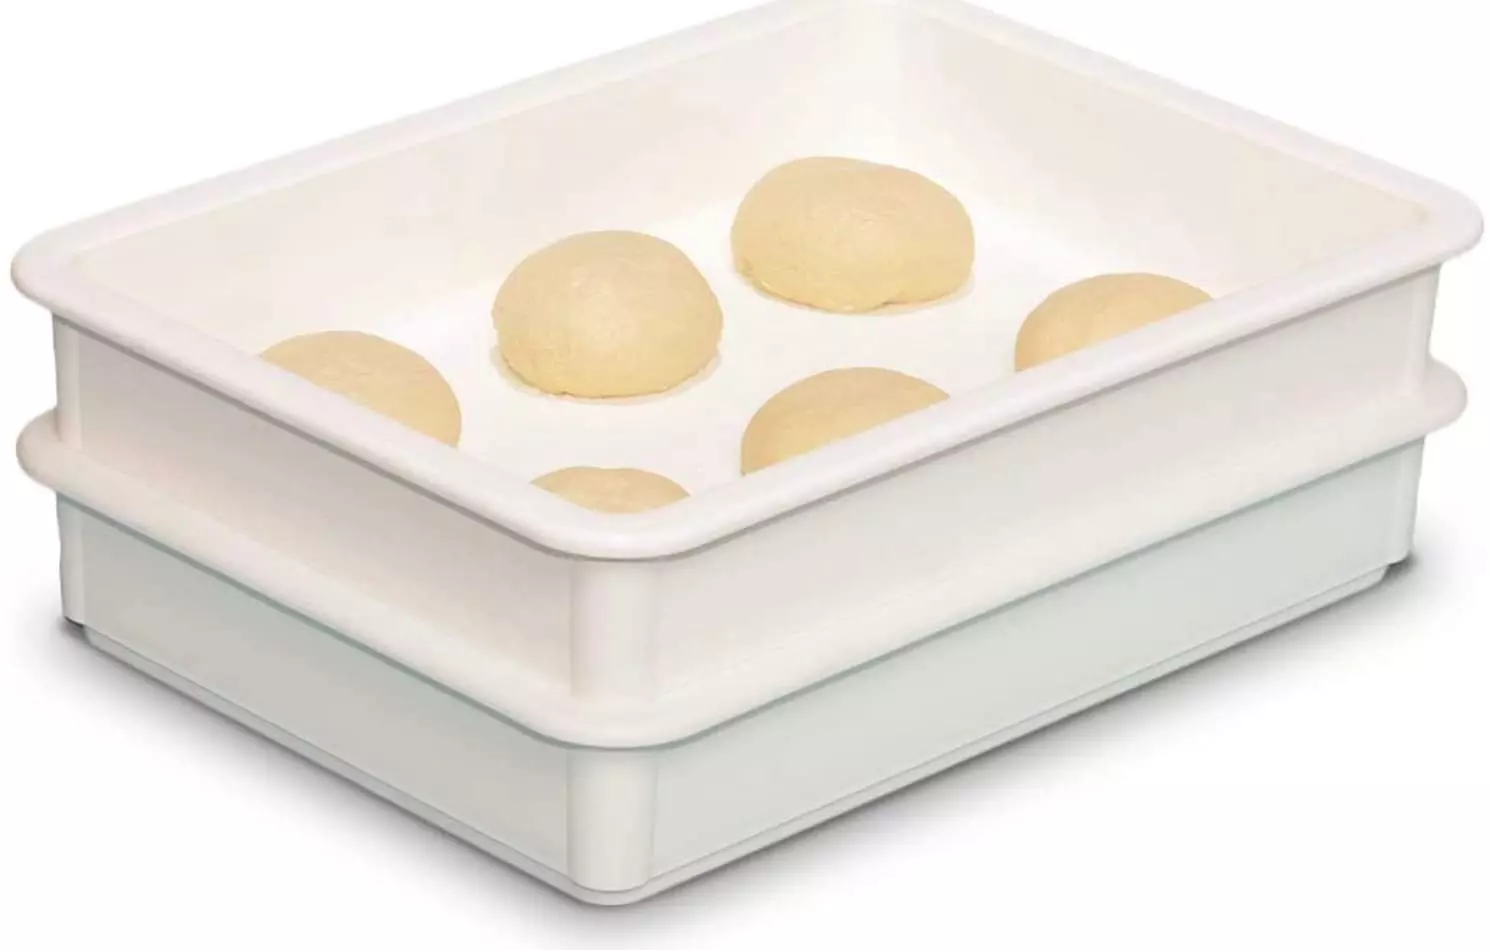 Best Pizza Dough Proofing Container- Top 18 Picks!